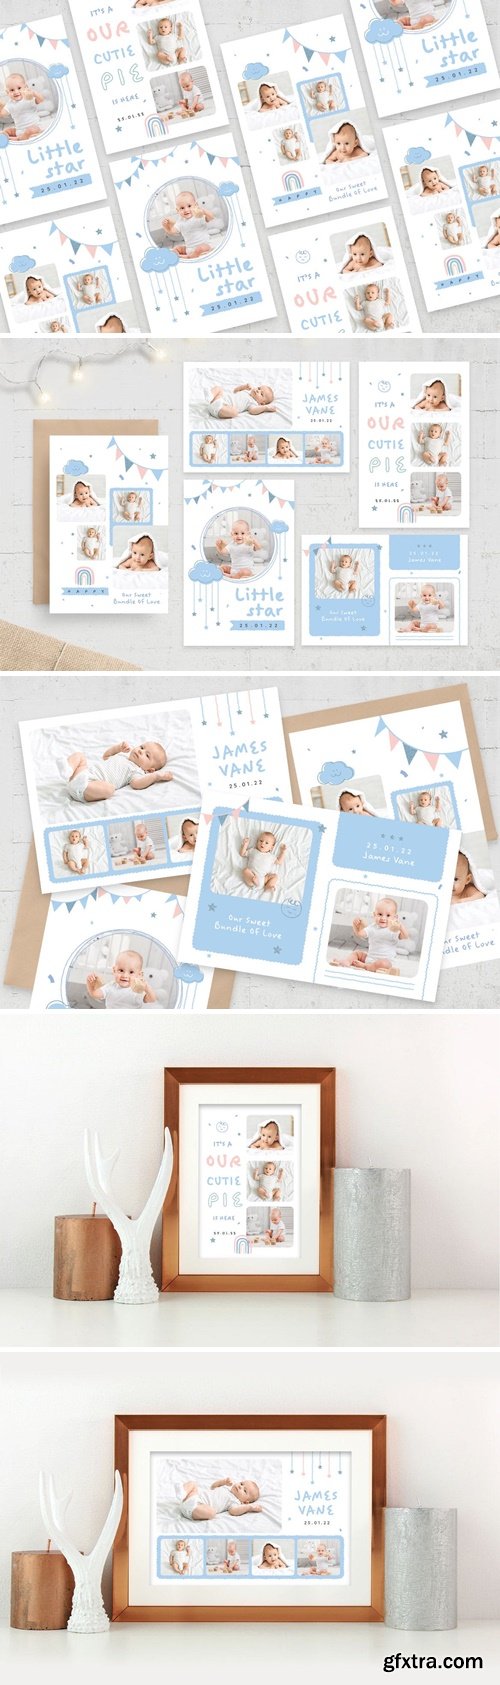 Baby Photo Collage Flyer